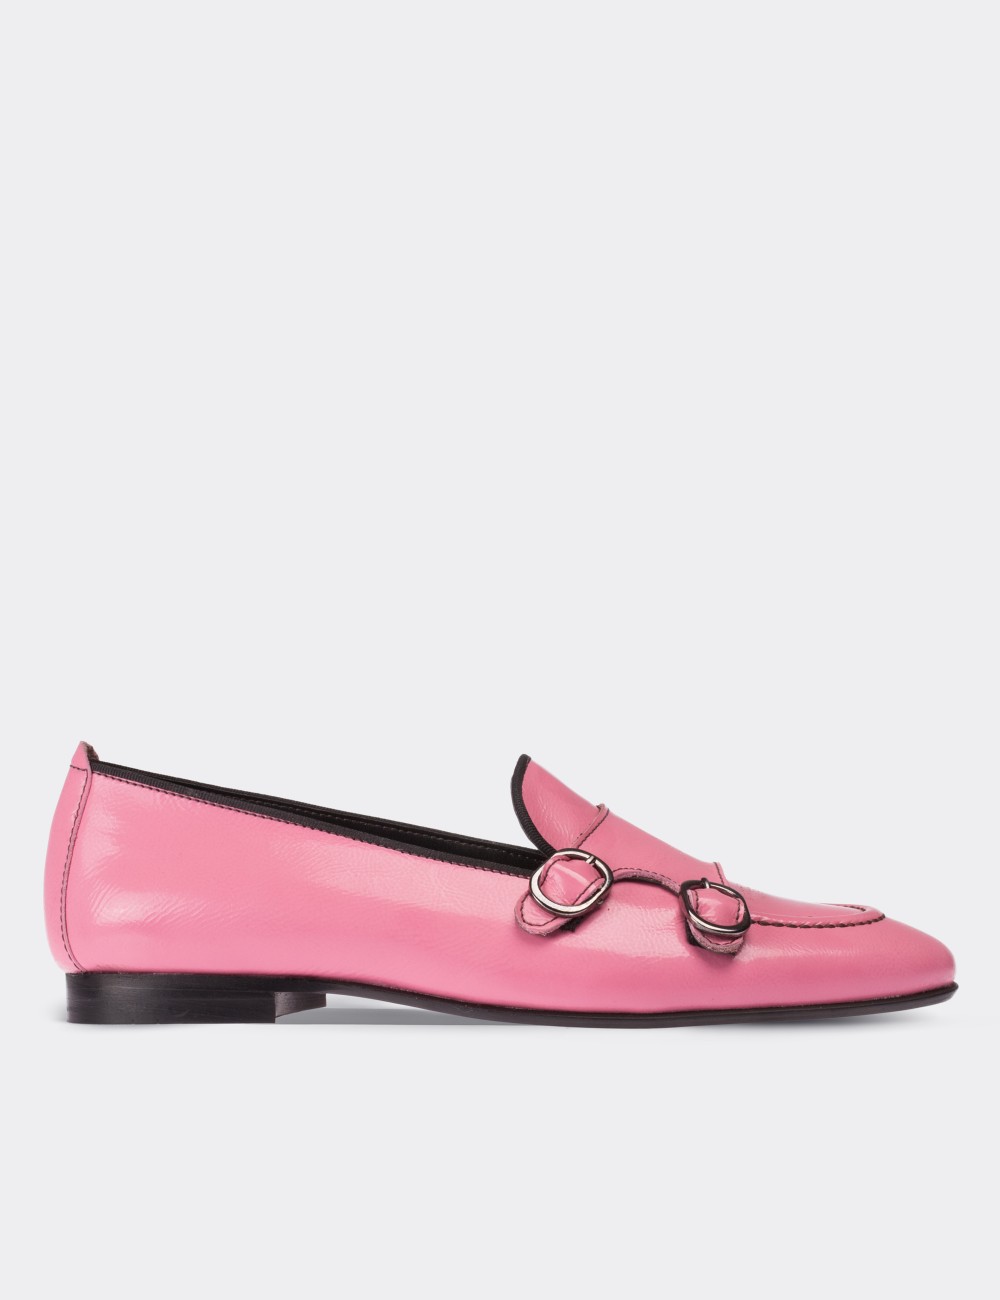 Pink Patent Leather Loafers - 01617ZPMBM01